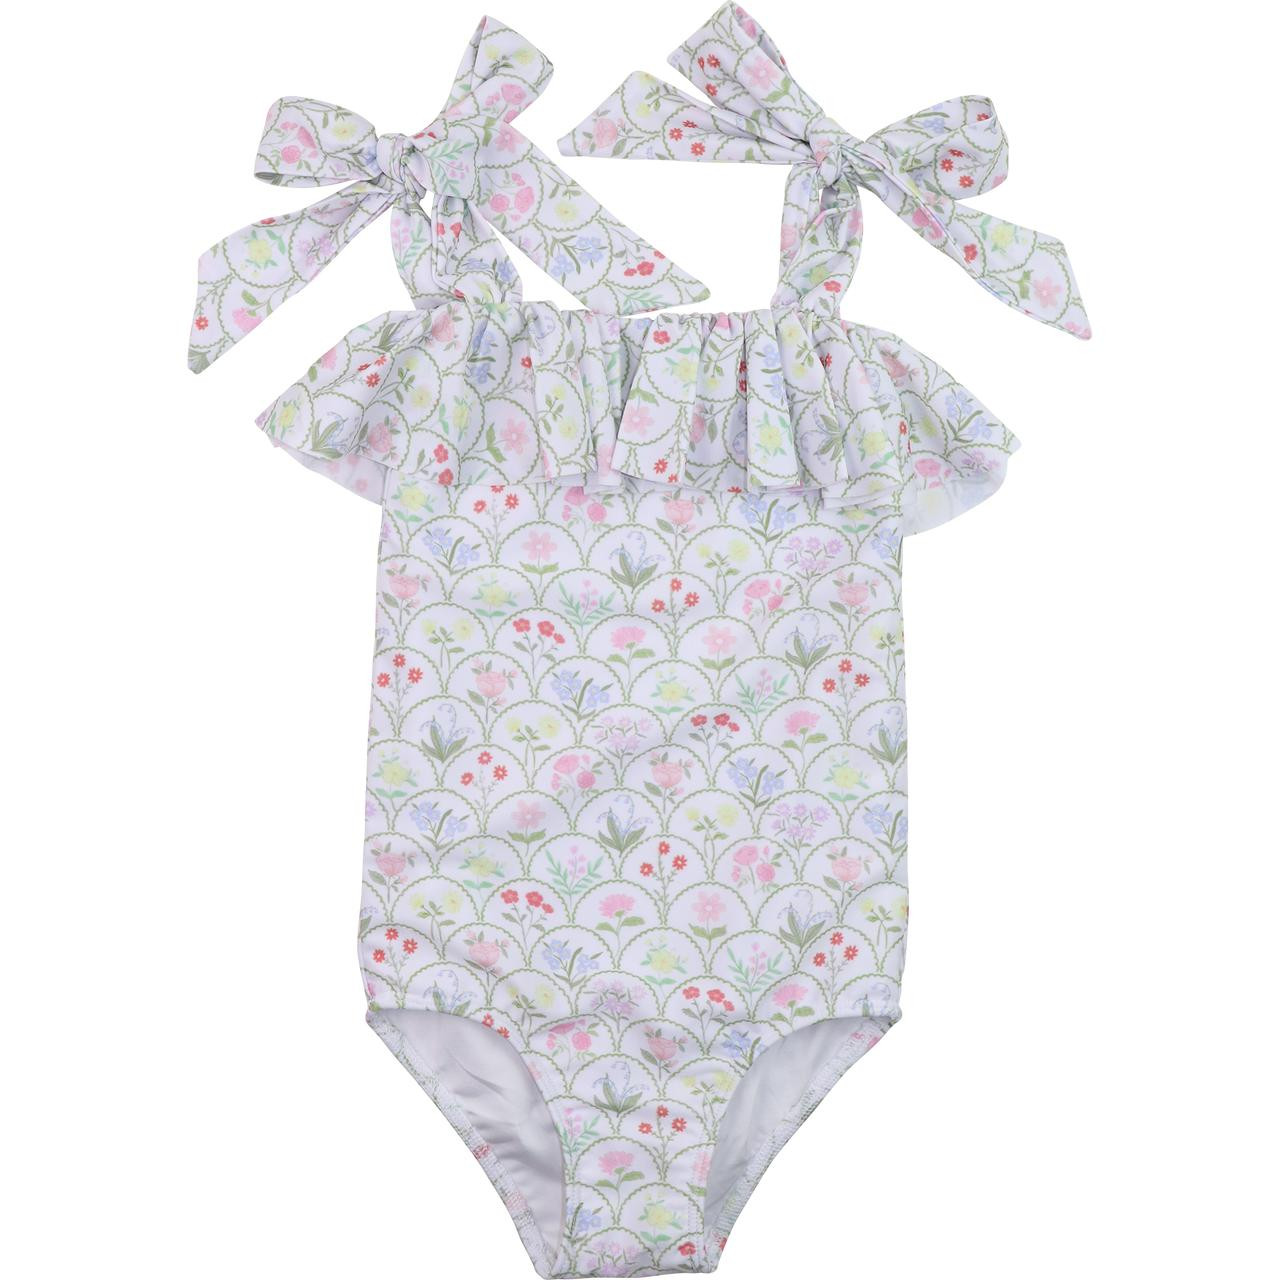 Garden Print Lycra Swimsuit - Cecil and Lou